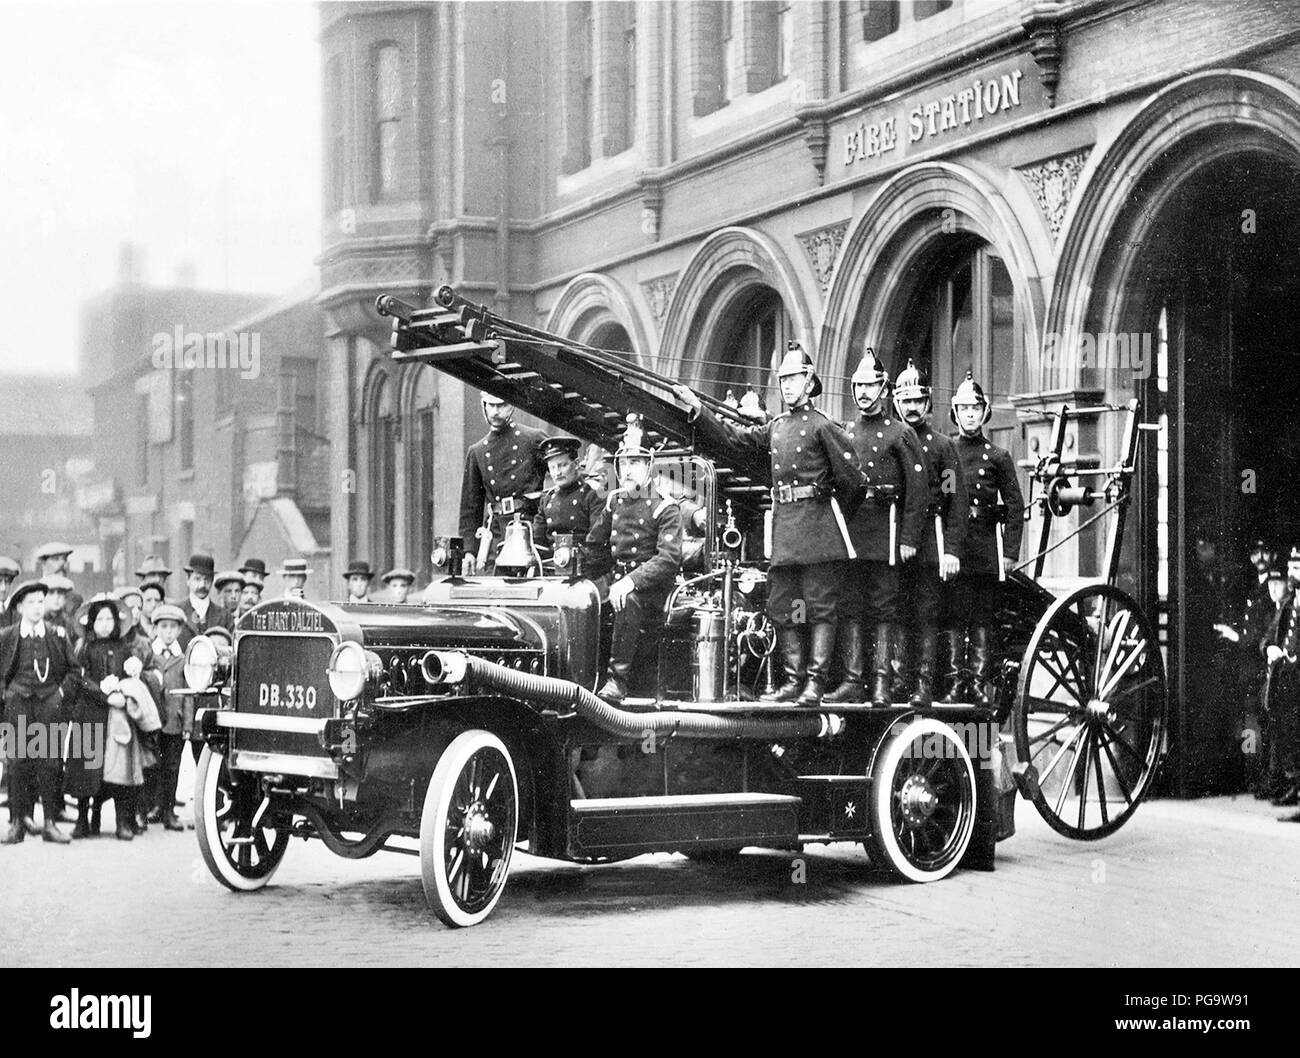 1915 Fire Fighters and Fire Engine CA Old Vintage Photo 8.5 x 11 Reprint LA